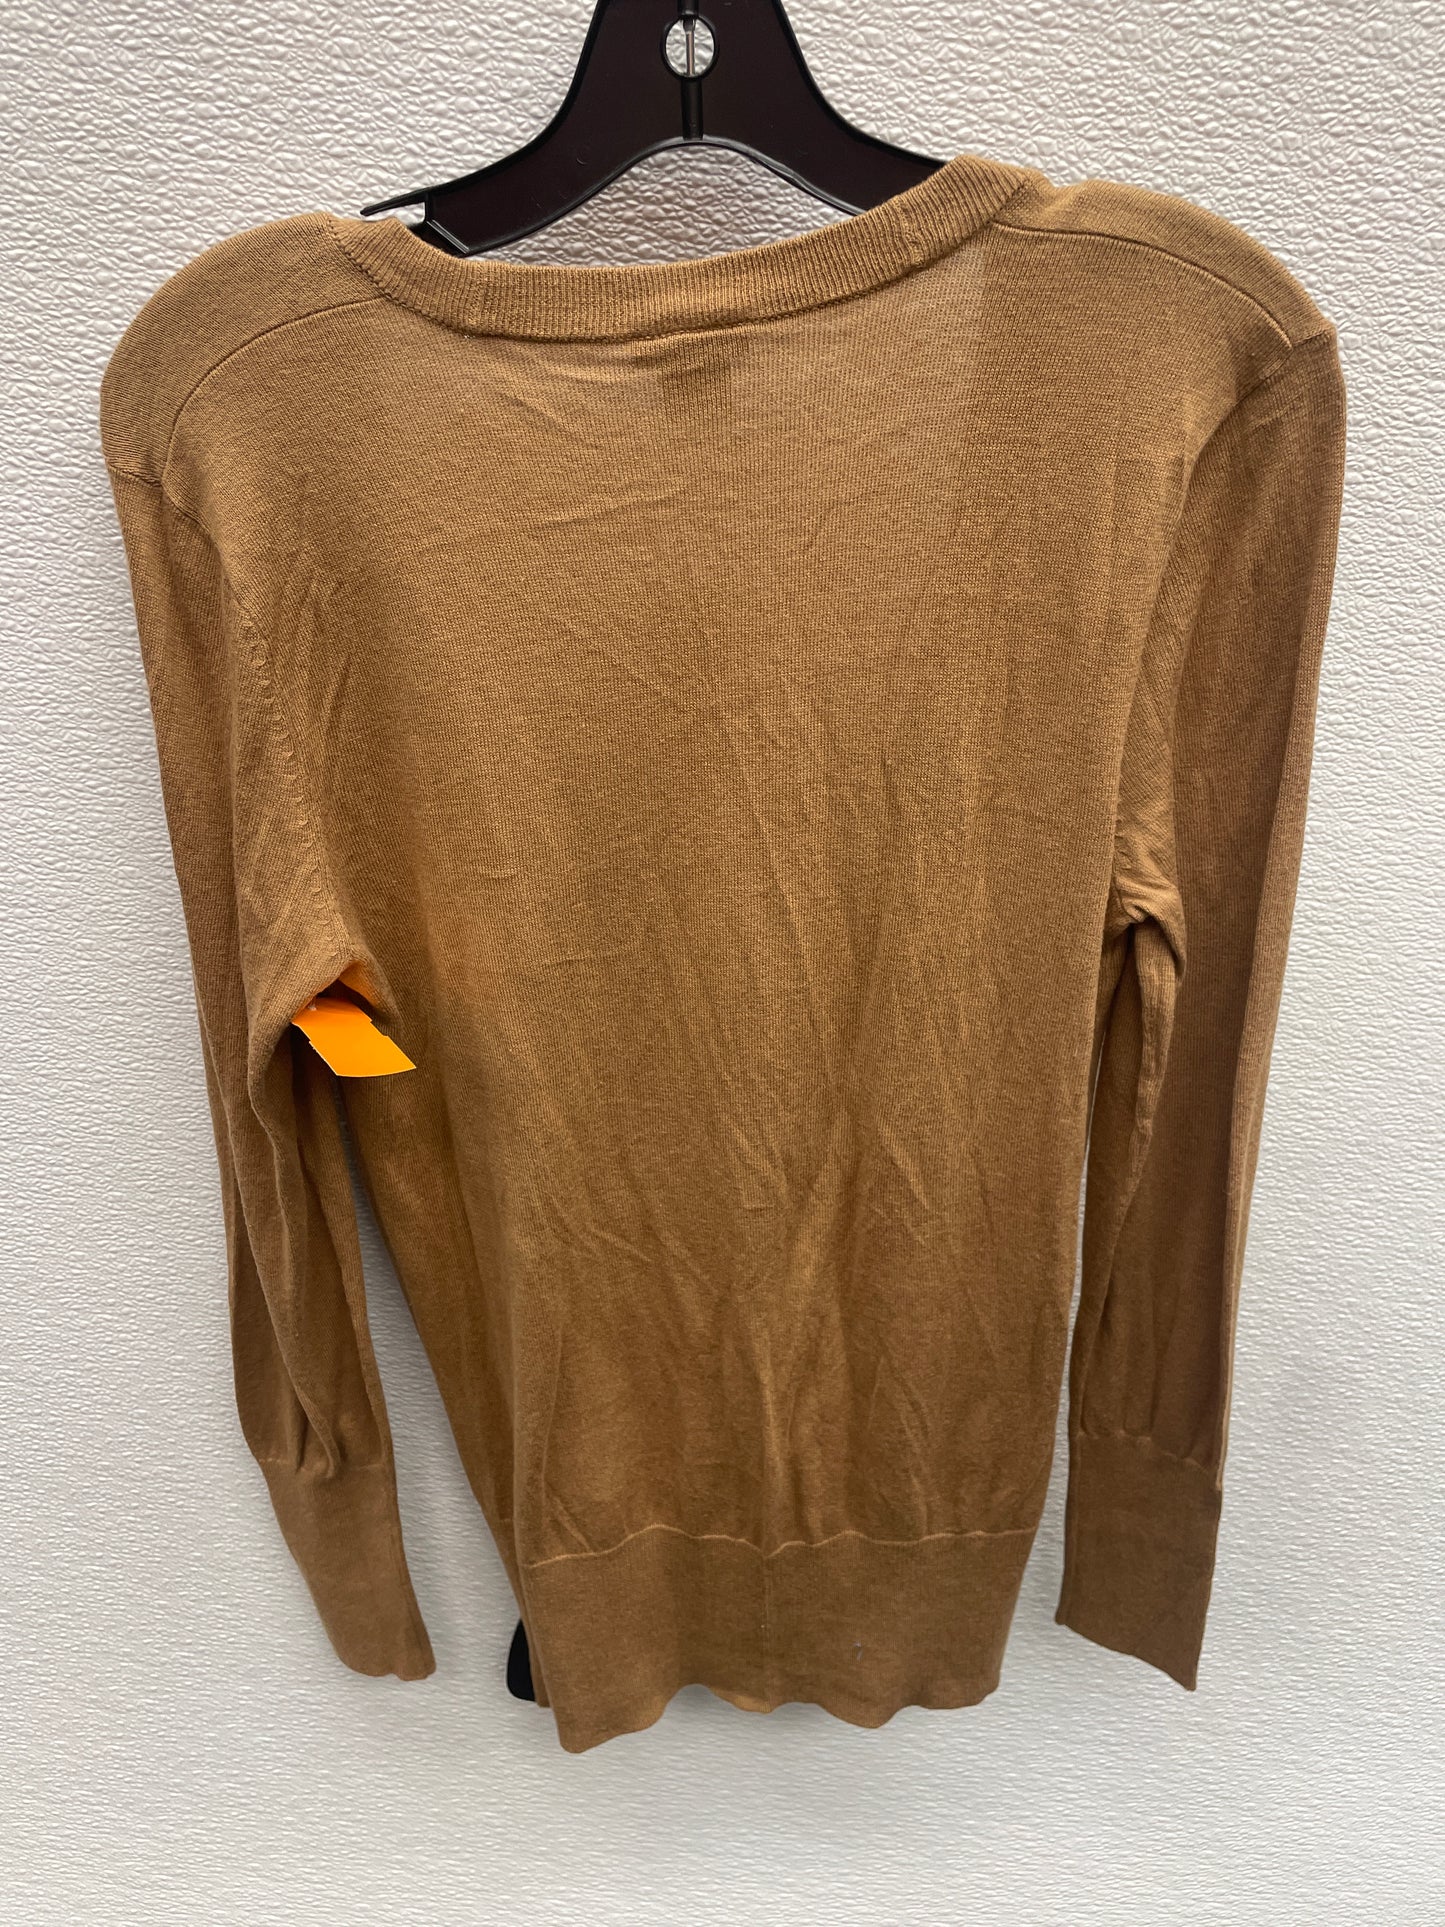 Sweater By Ann Taylor O  Size: M